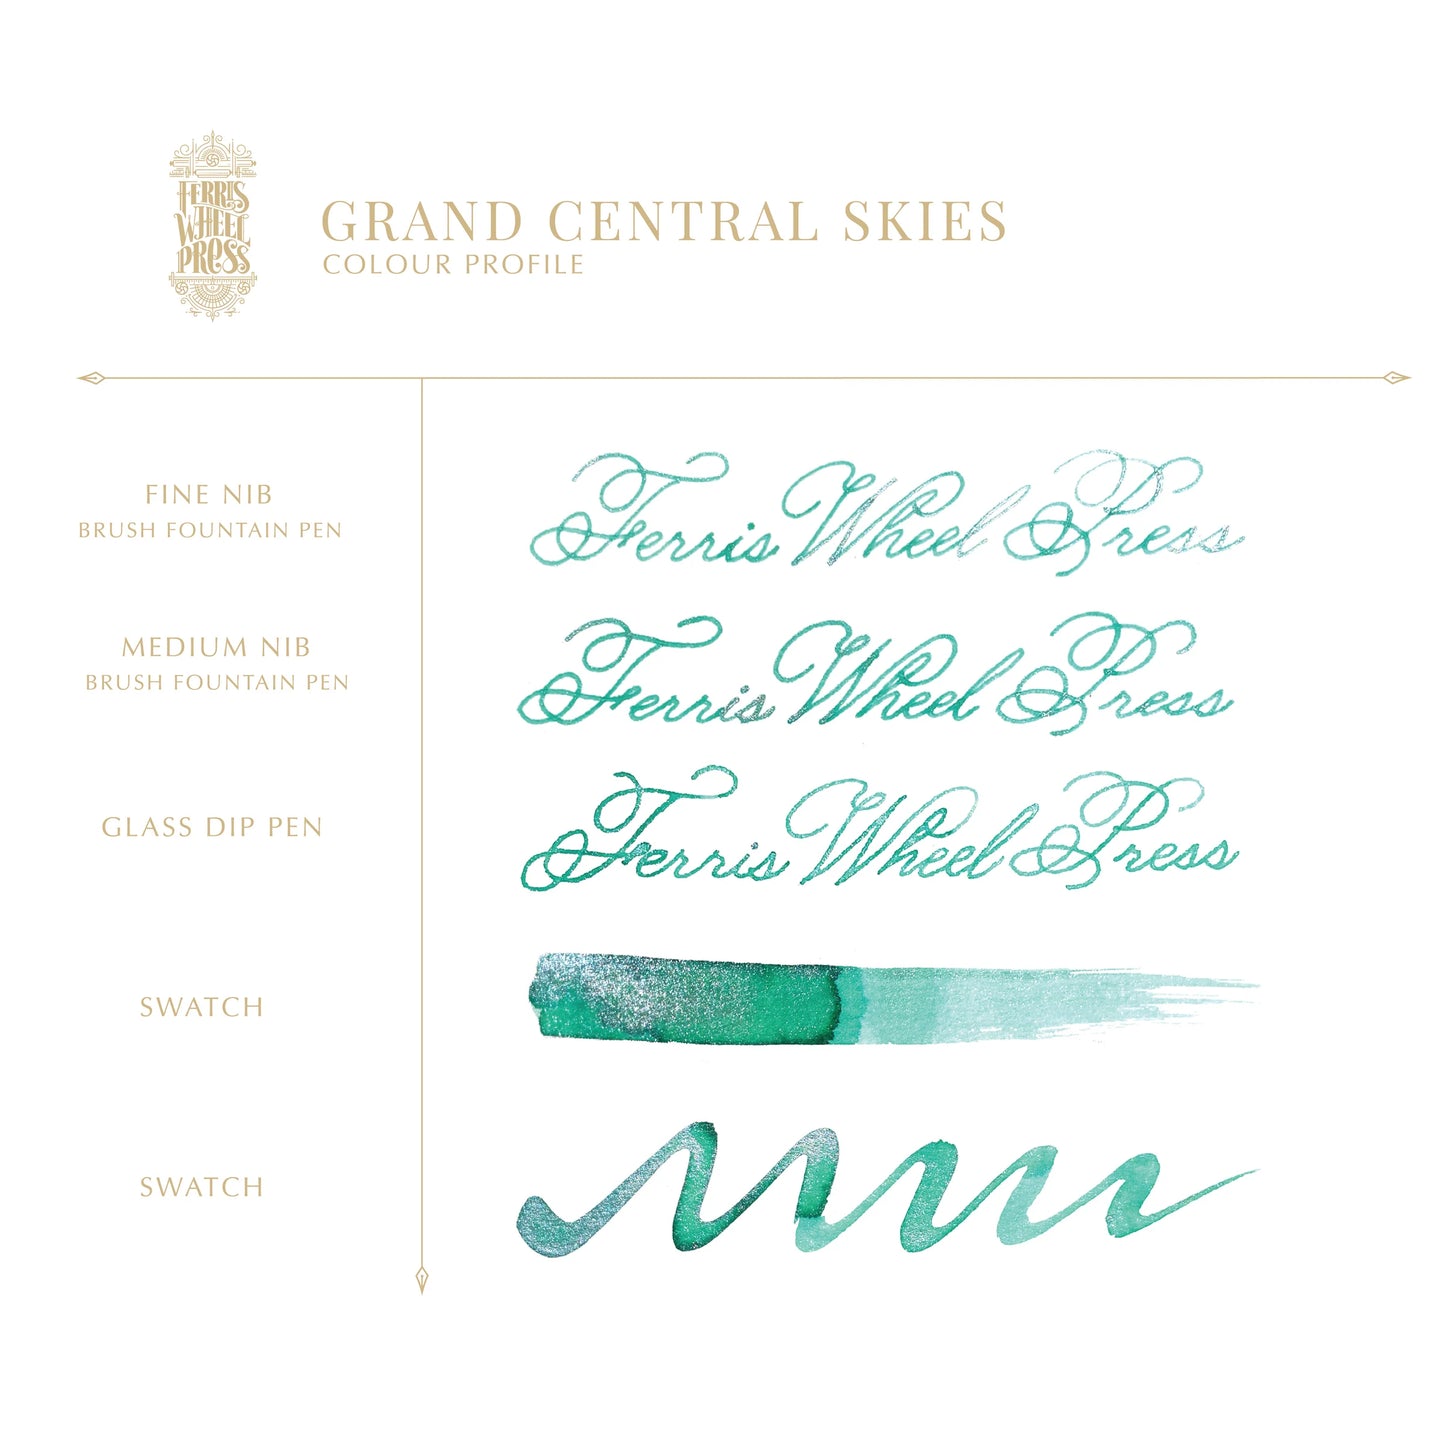 Ferris Wheel Press, Grand Central Skies, New York New York Collection, 38ml Ink